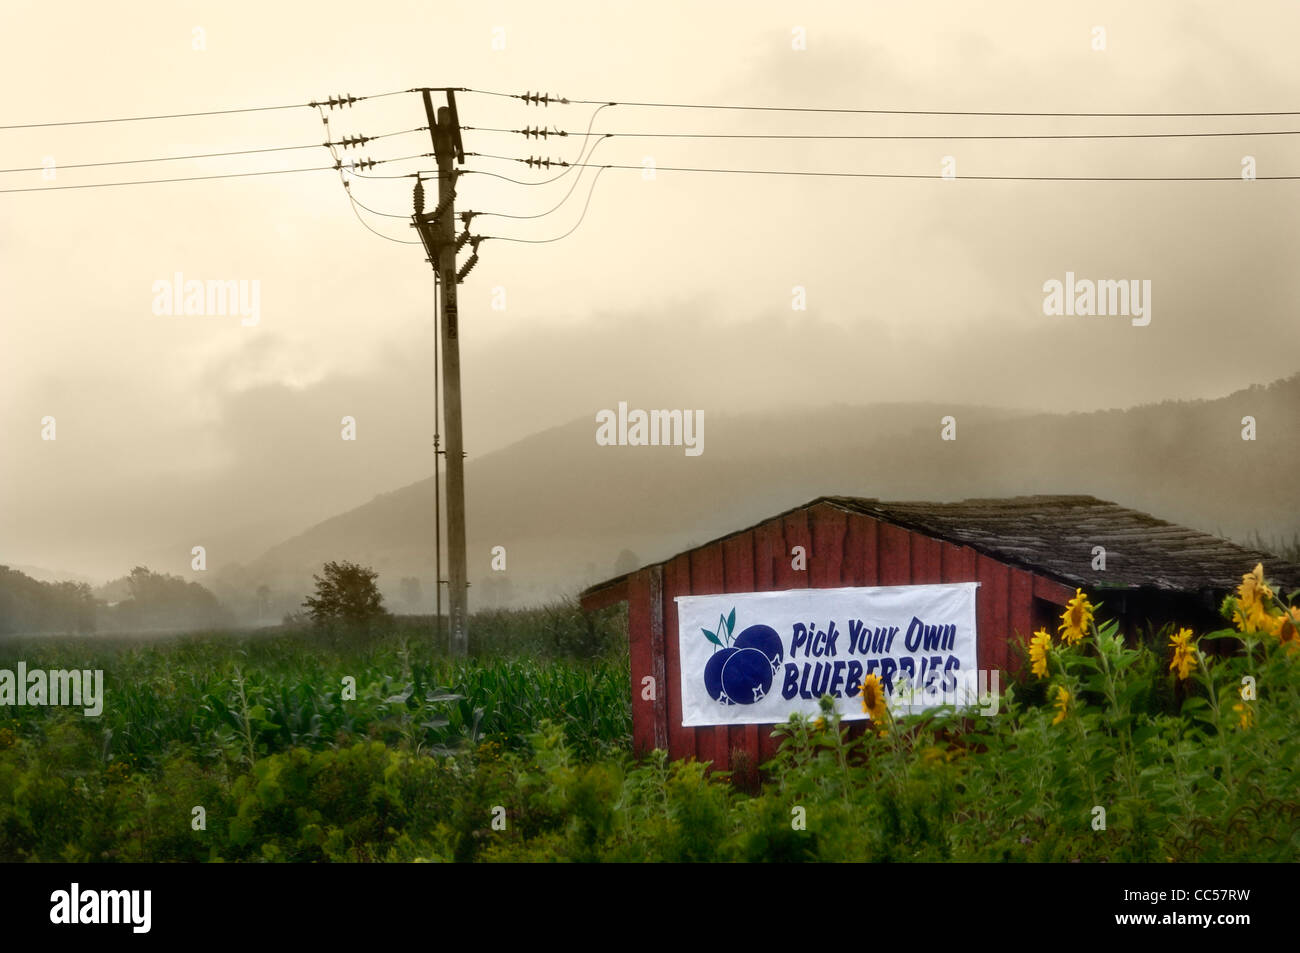 pick your own blueberries sign in a rural field with high-voltage electric utility poles in the background in fog, sunflowers Stock Photo